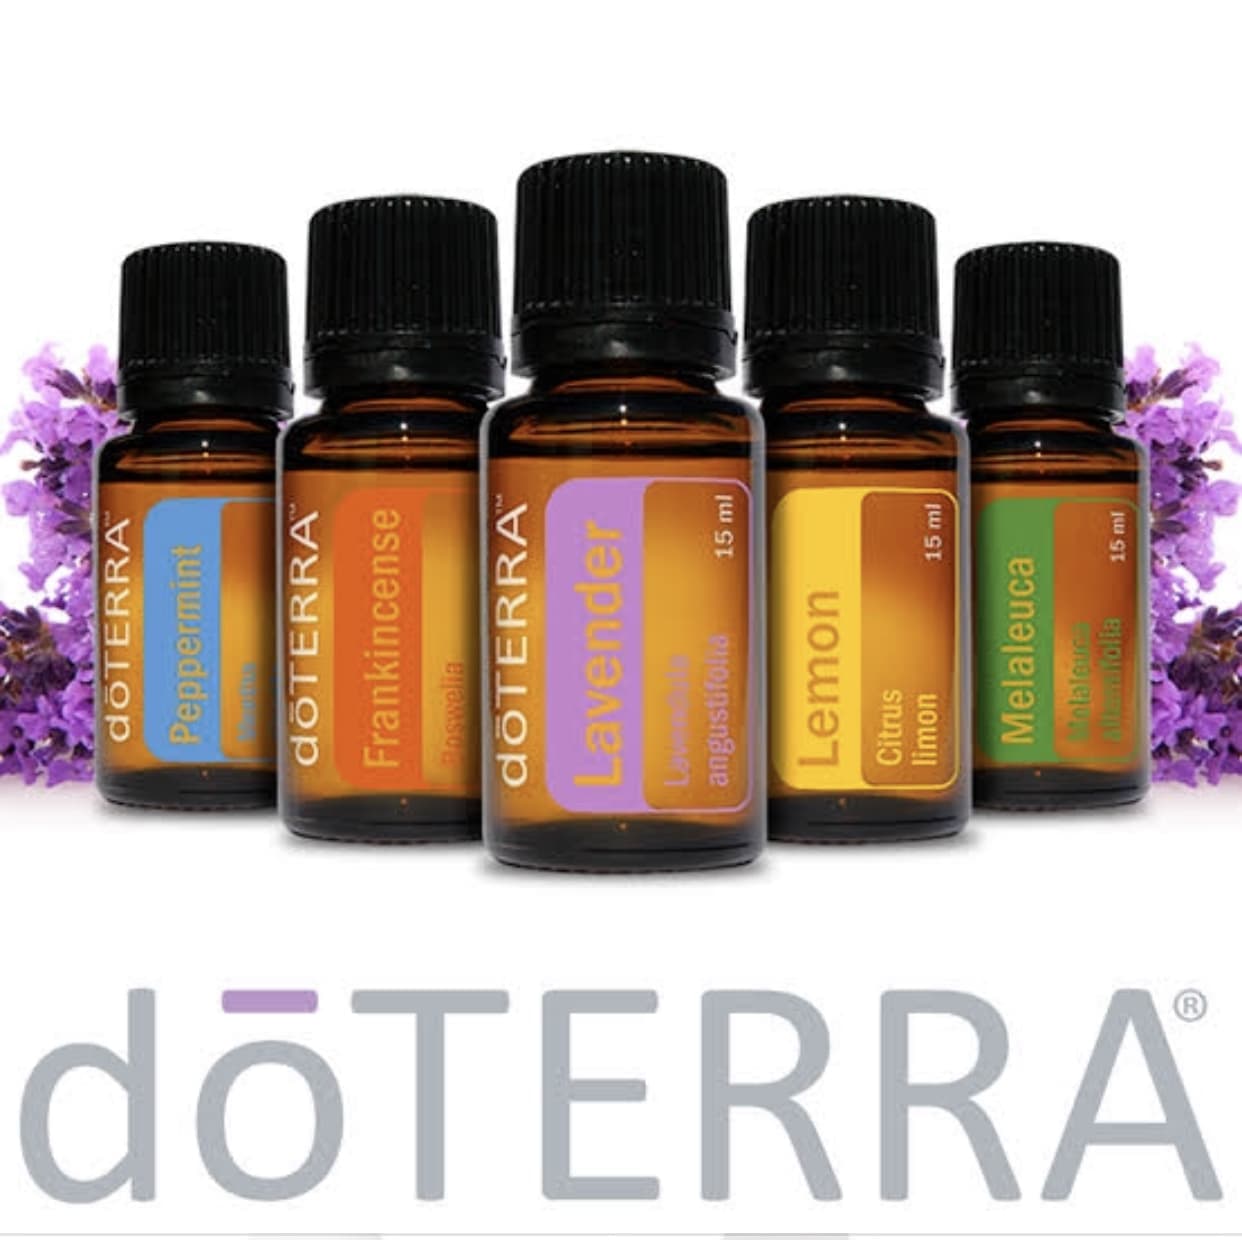 DóTerra by Alma Natural